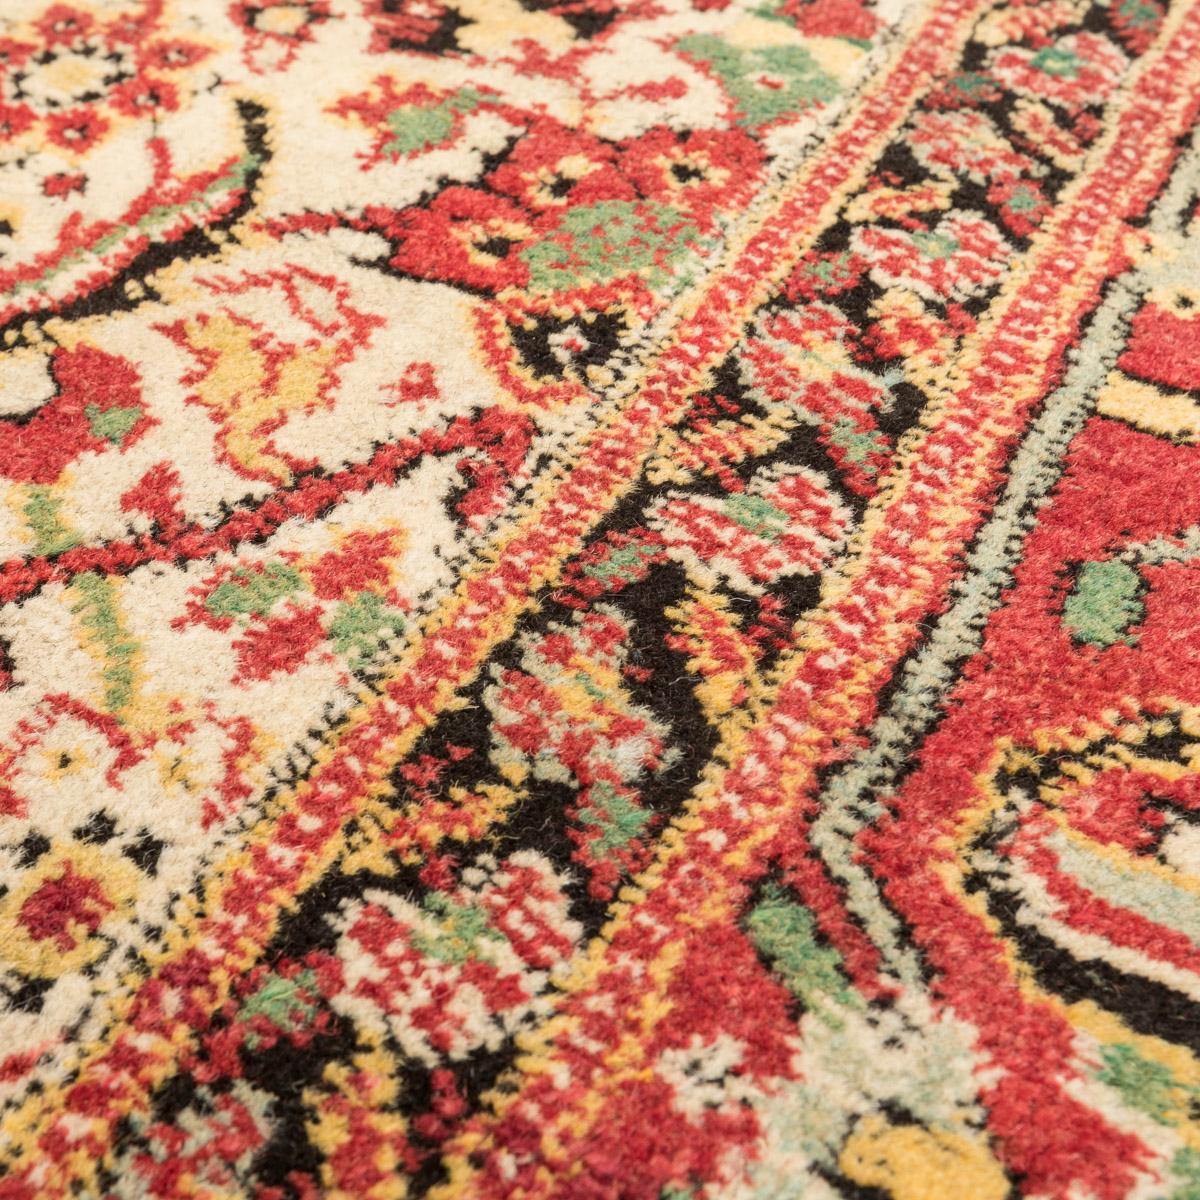 19th Century XIX Century, Agra Rug in Reds and Yellows on a Beige Background. For Sale